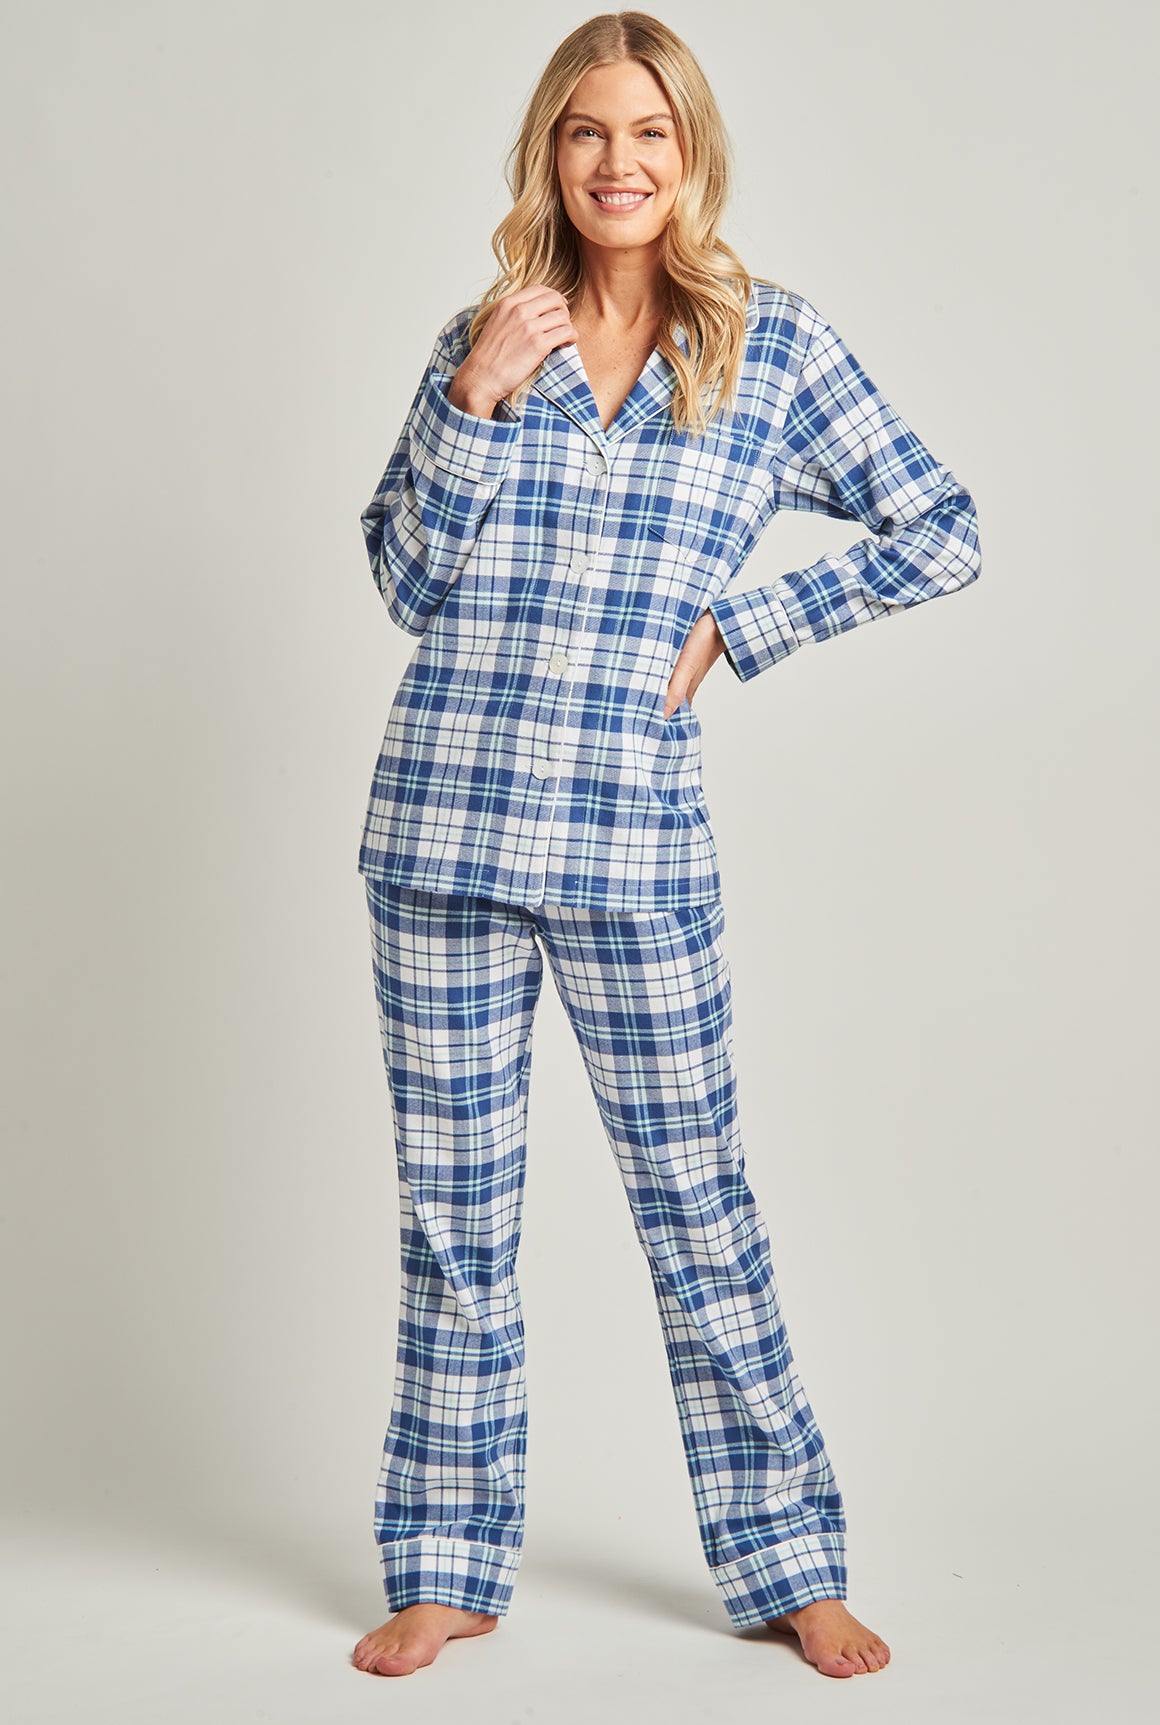 The 15 Best Flannel Pajamas of 2023